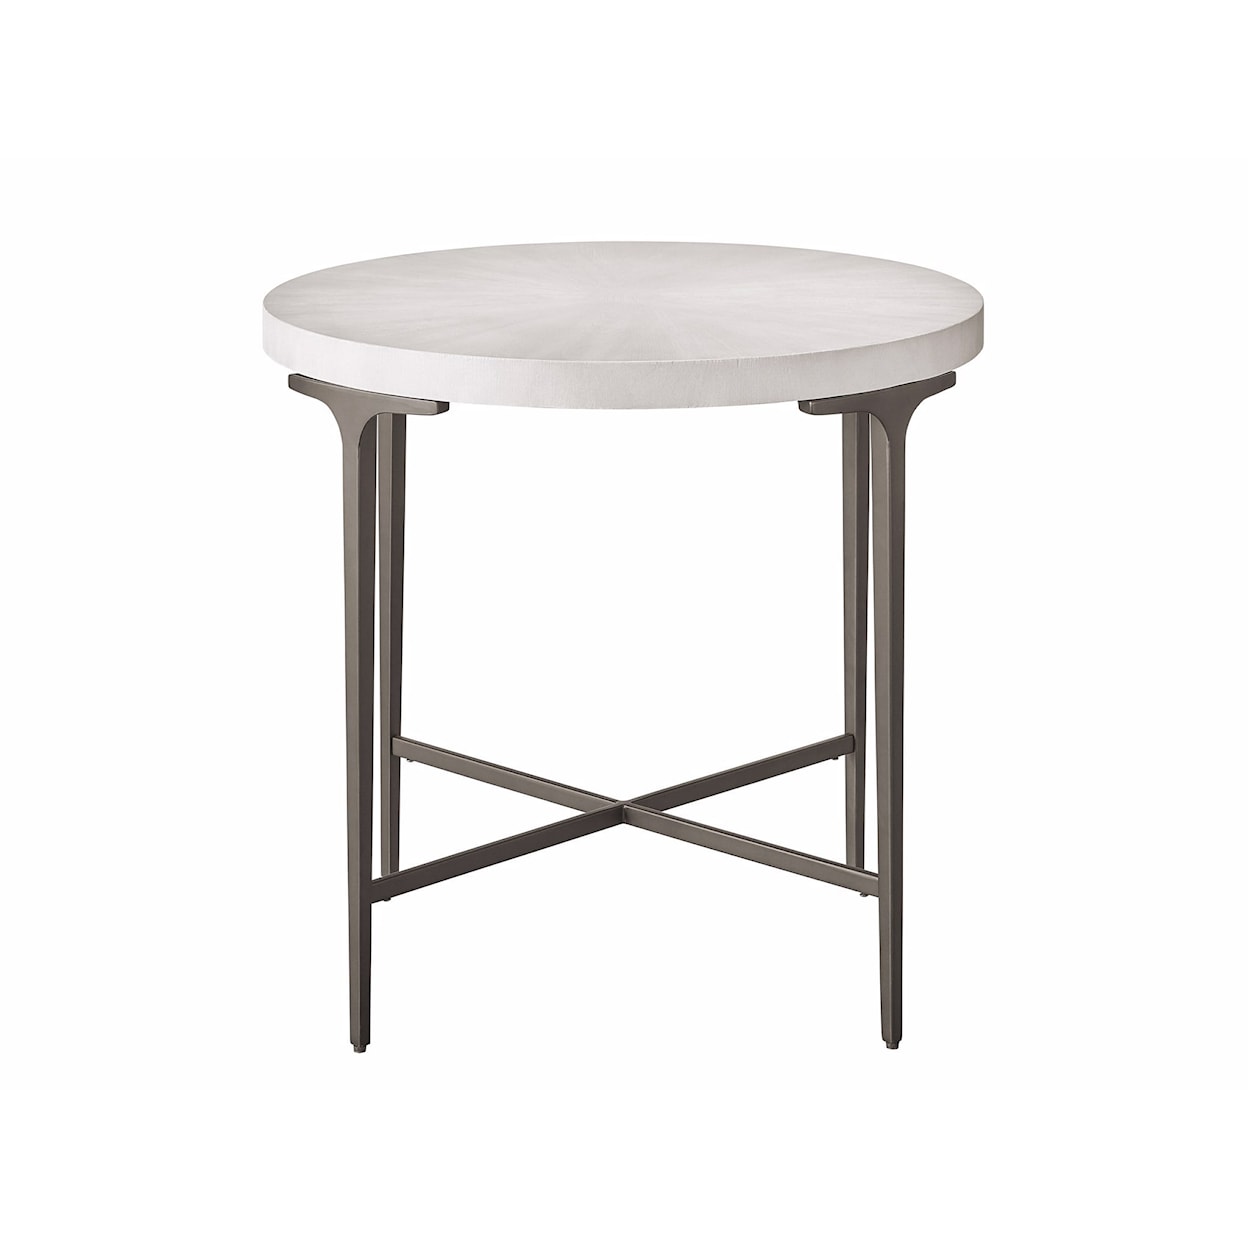 Universal Soliloquy Dahlia End Table